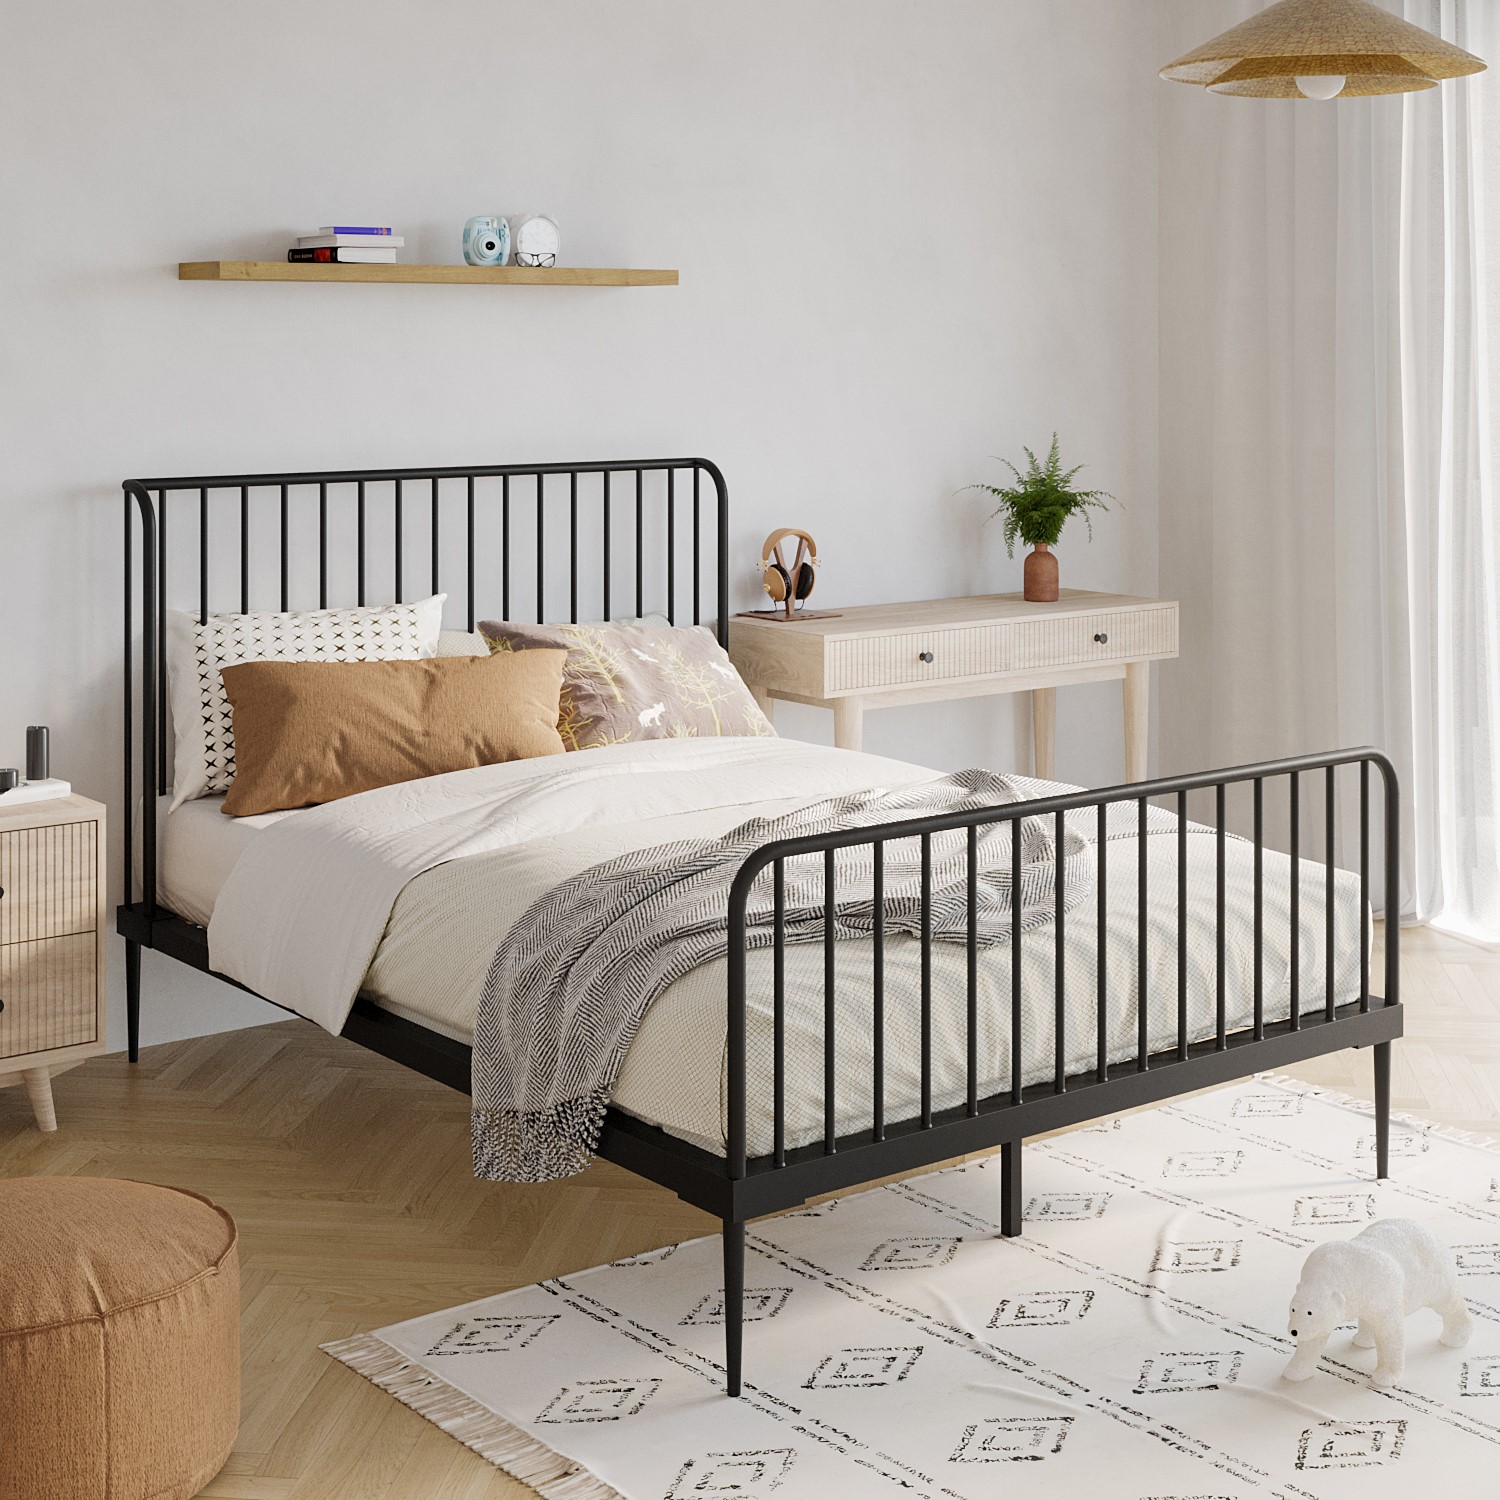 Read more about Black metal small double bed frame jackson